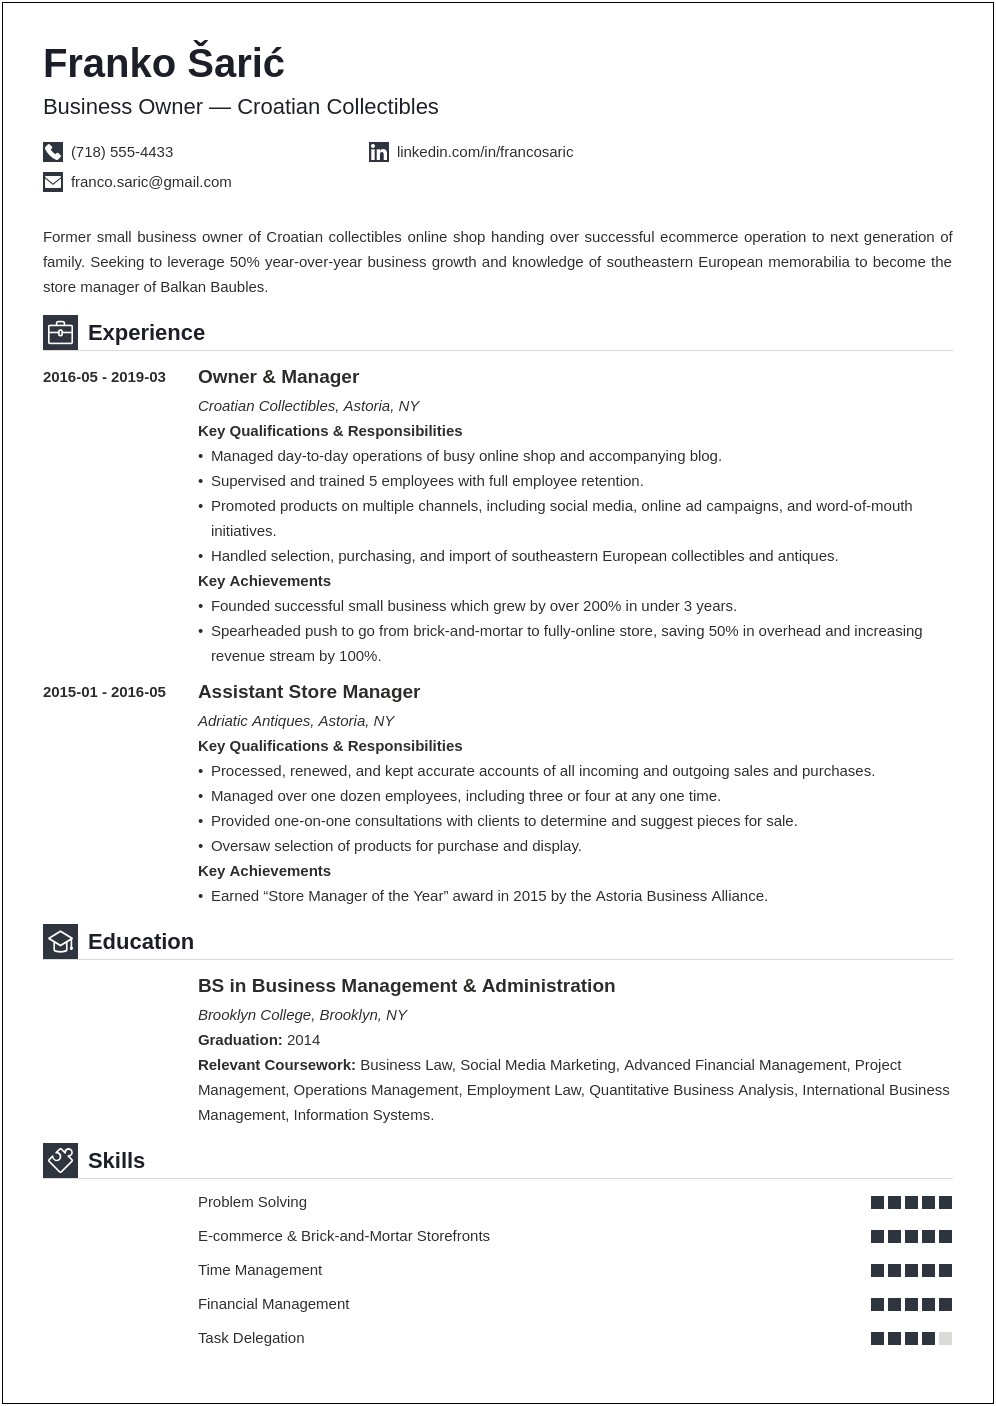 About Me In Buisness Resume Sample